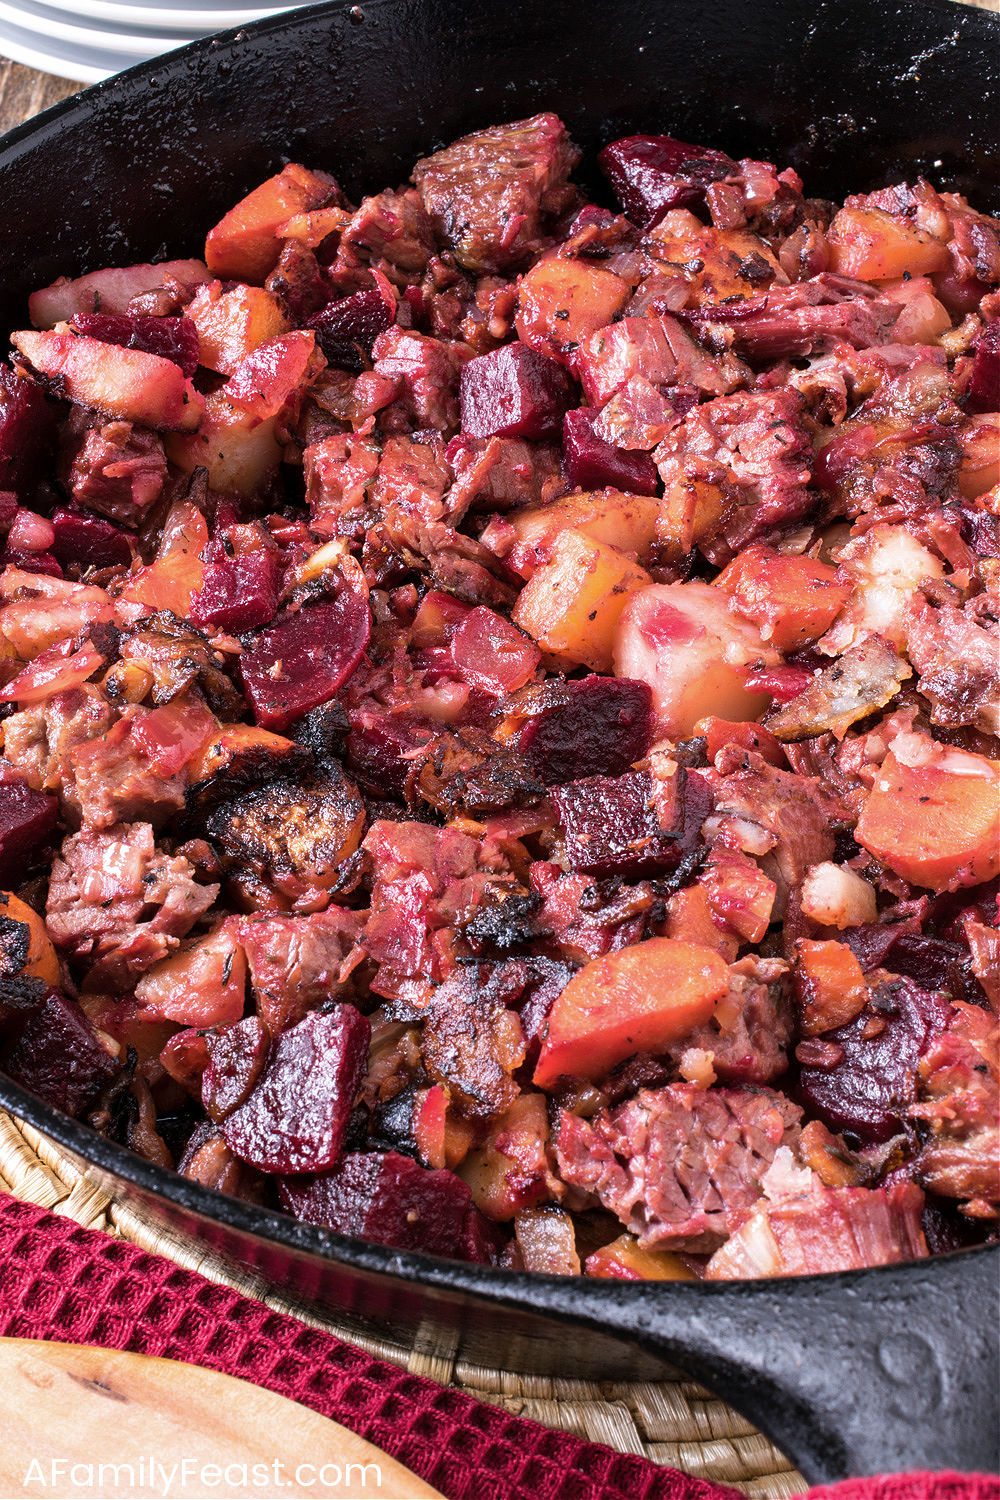 Red Flannel Hash - A Family Feast